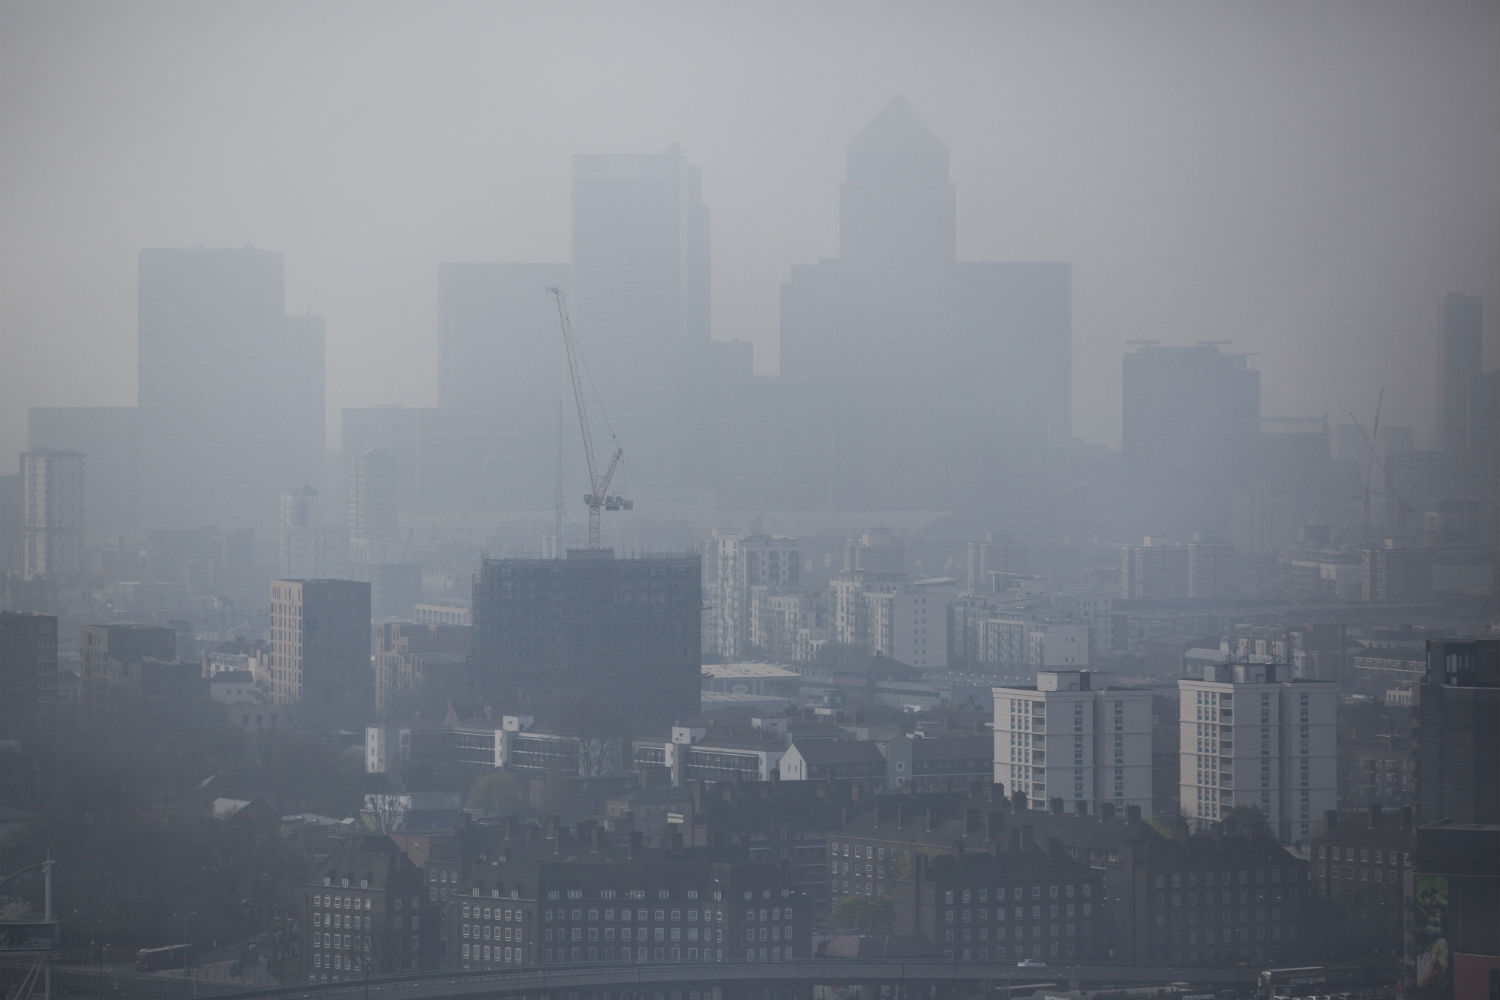 Smog levels are high in London